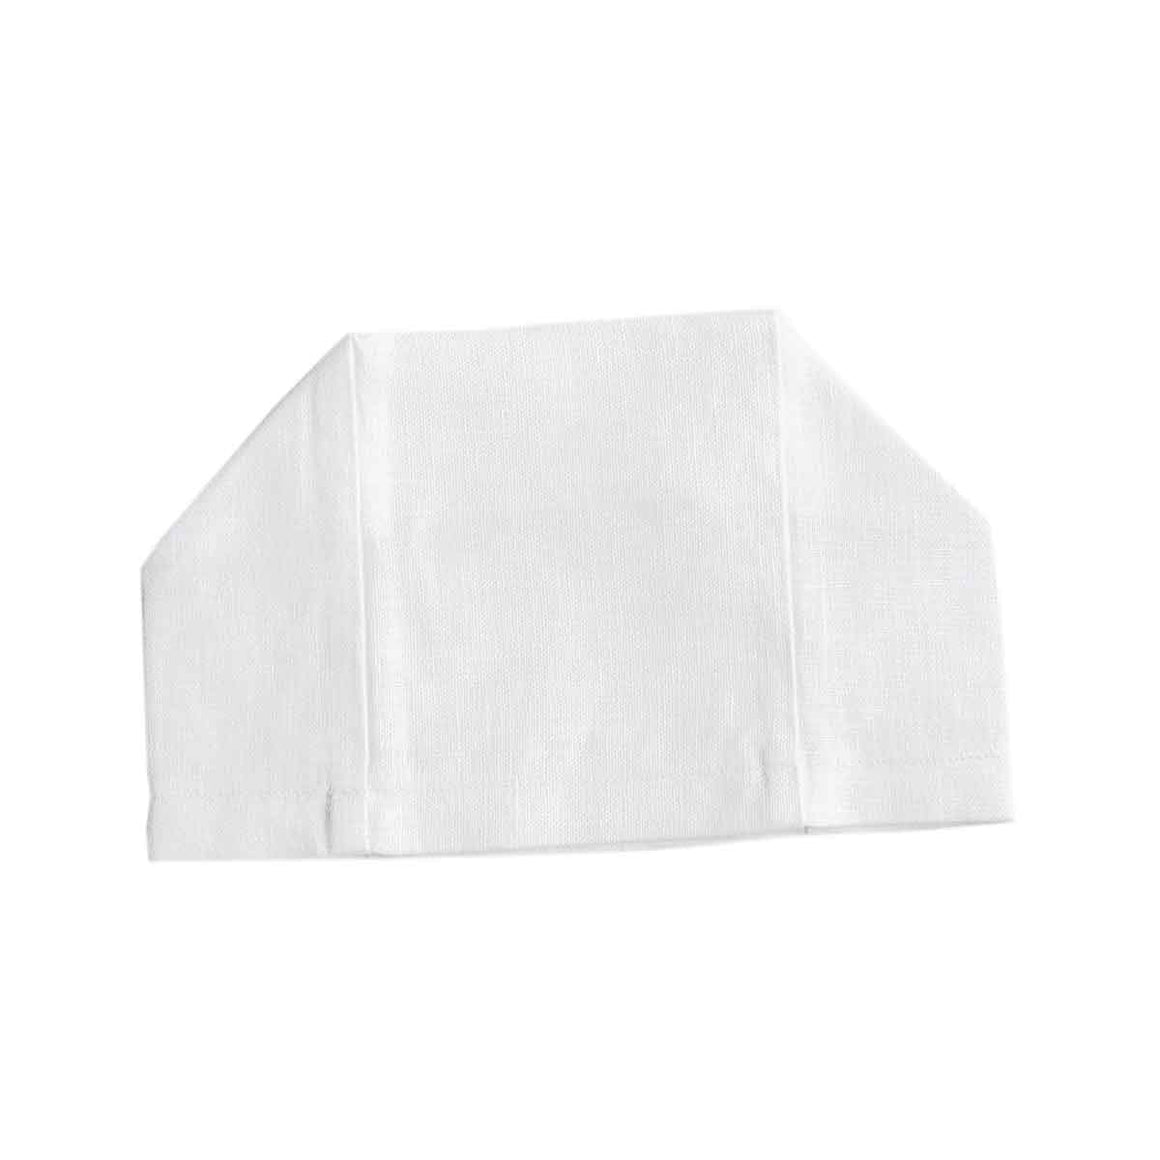 En Plain Air Tissue Box Cover | Garden Folly Fine Linens - tissue box covers for embroidering, fancy linen tissue box covers, European linen tissue box covers